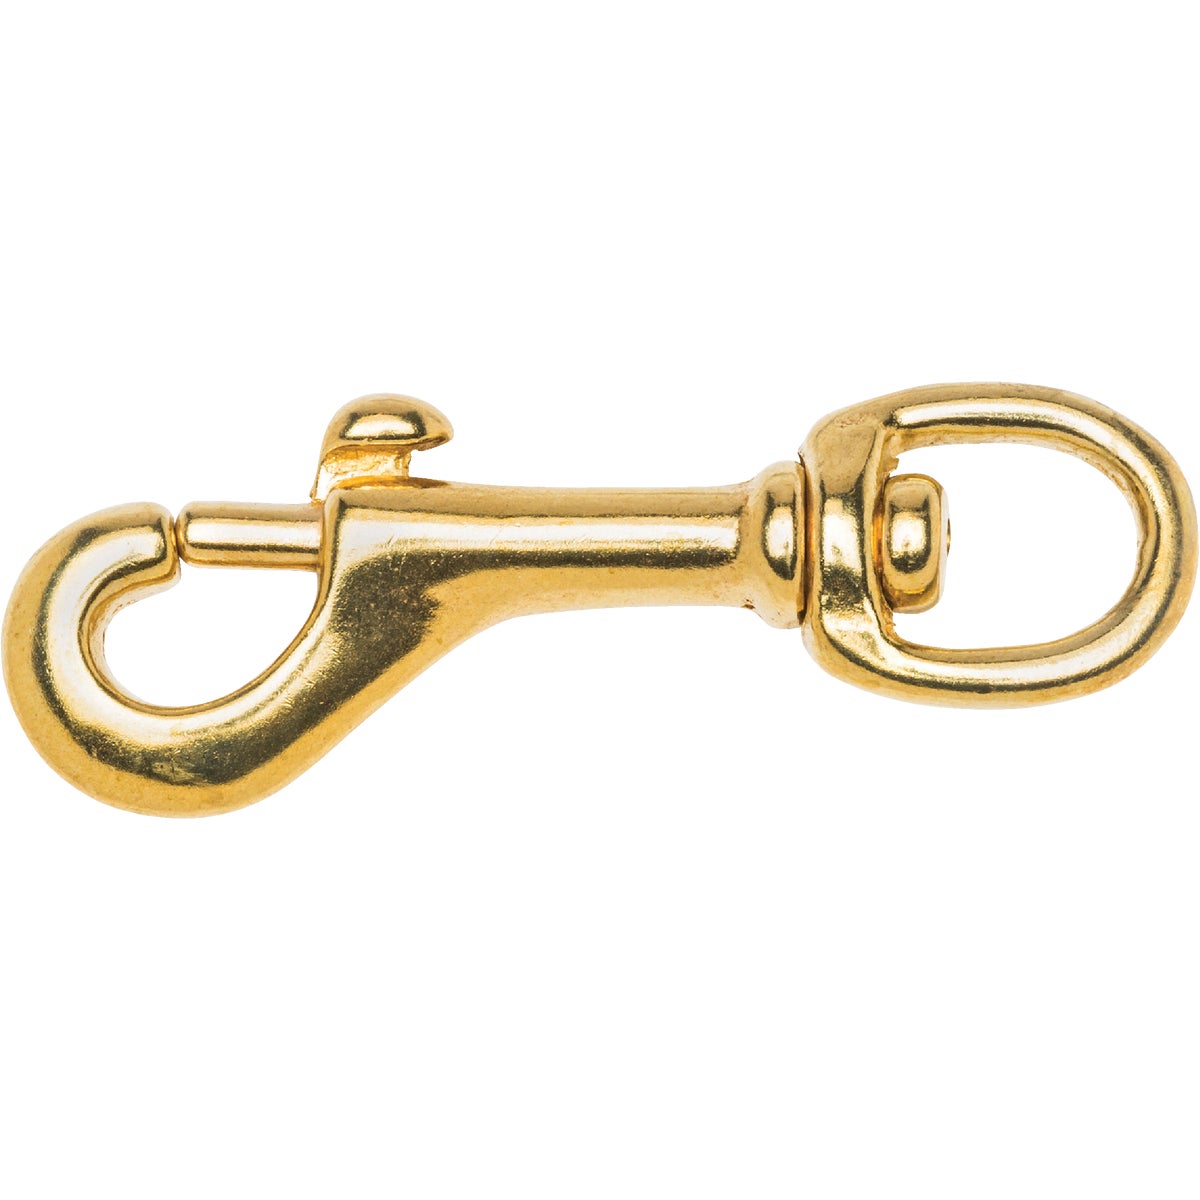 Item 746125, Solid bronze swivel eye snap. Eye size: 1/2-inch. Overall length: 3-inch.